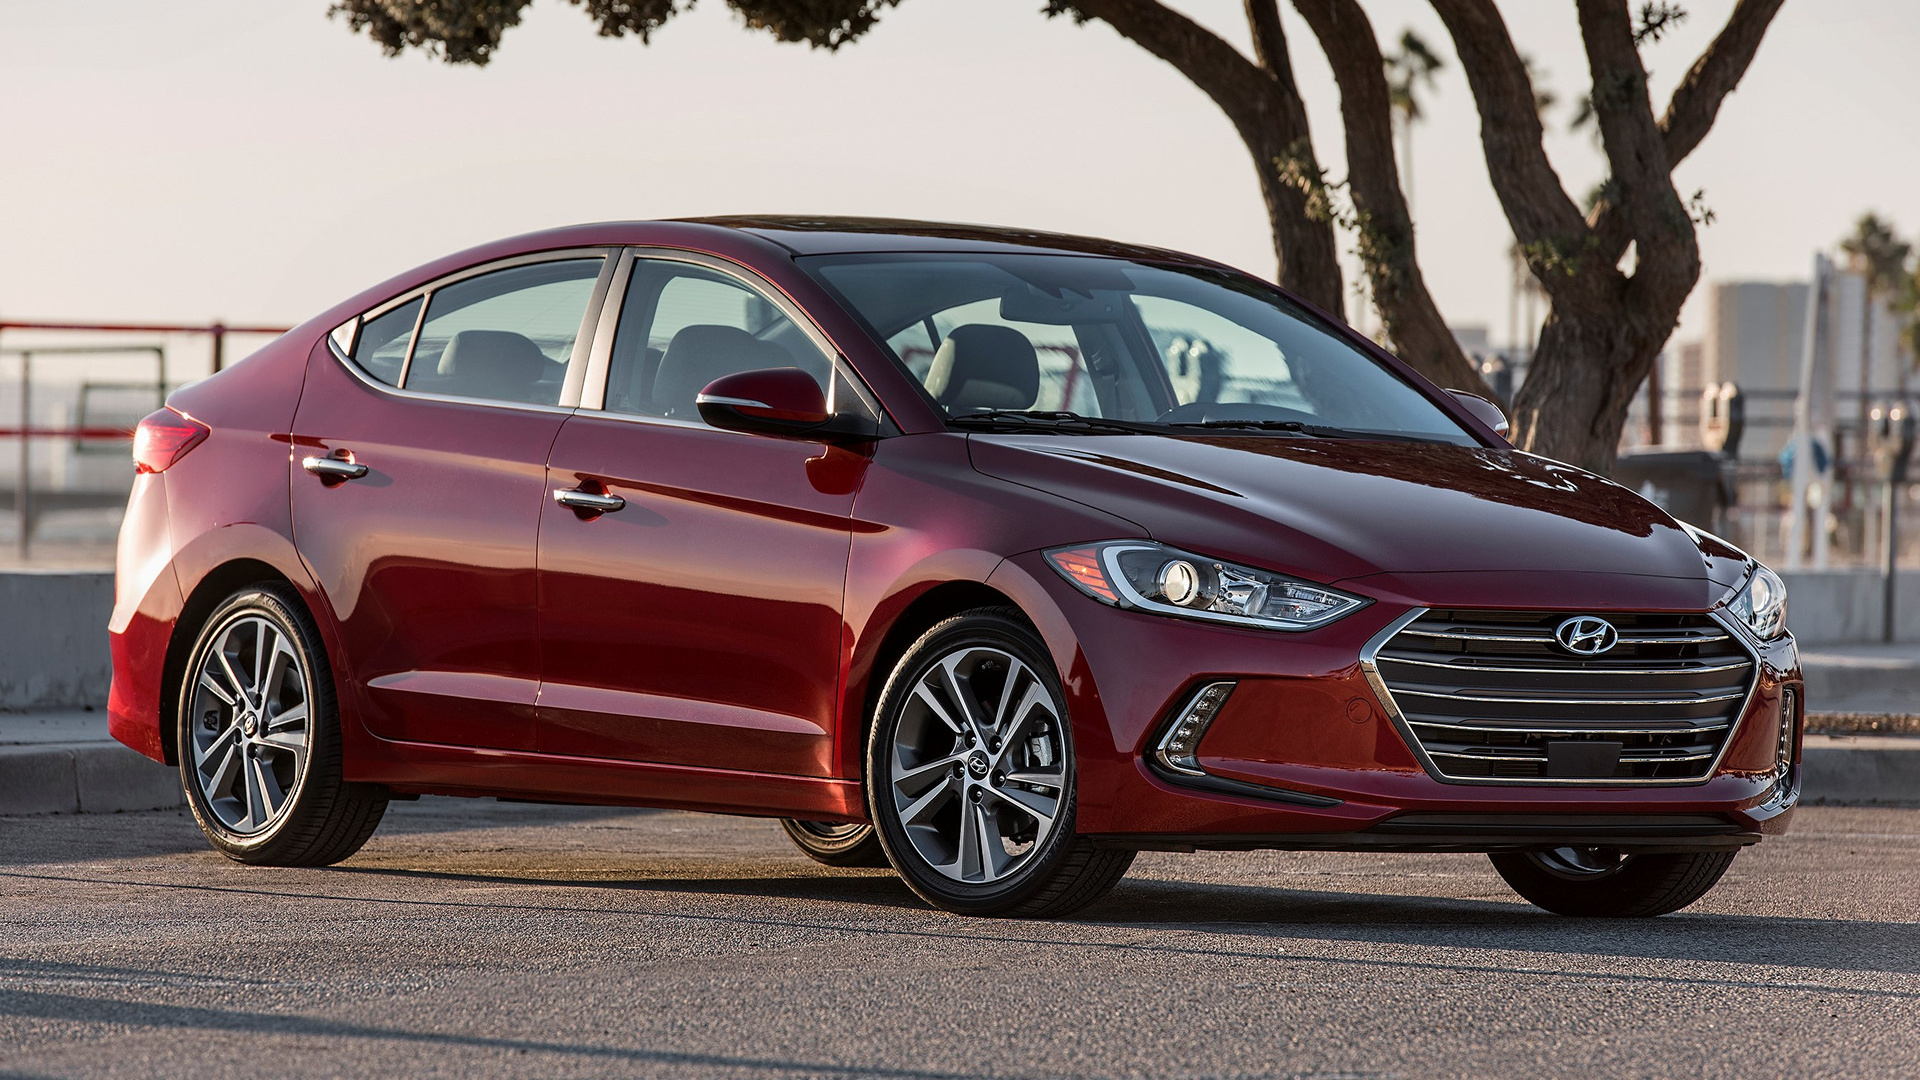 60 Hyundai Elantra HD Wallpapers and Backgrounds